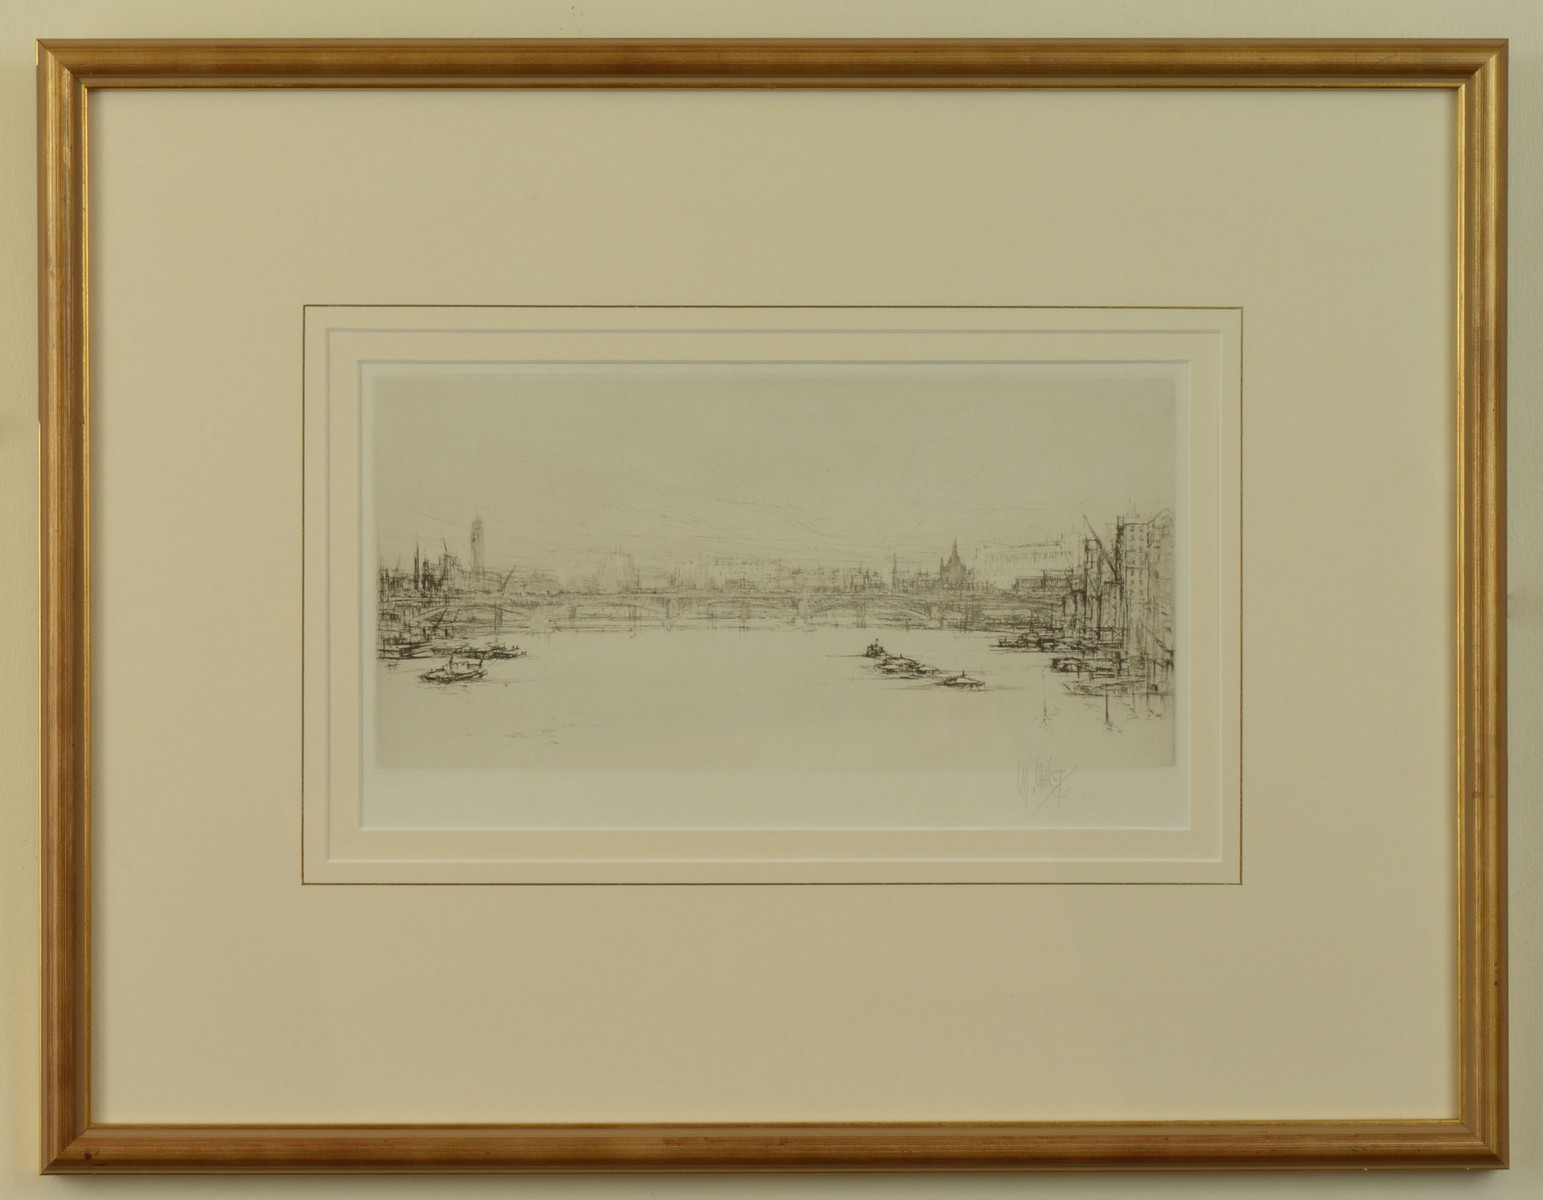 William Walcot RE (1874-1943), On the Thames, etching, signed in pencil, 14.5cm x 30cm, framed and